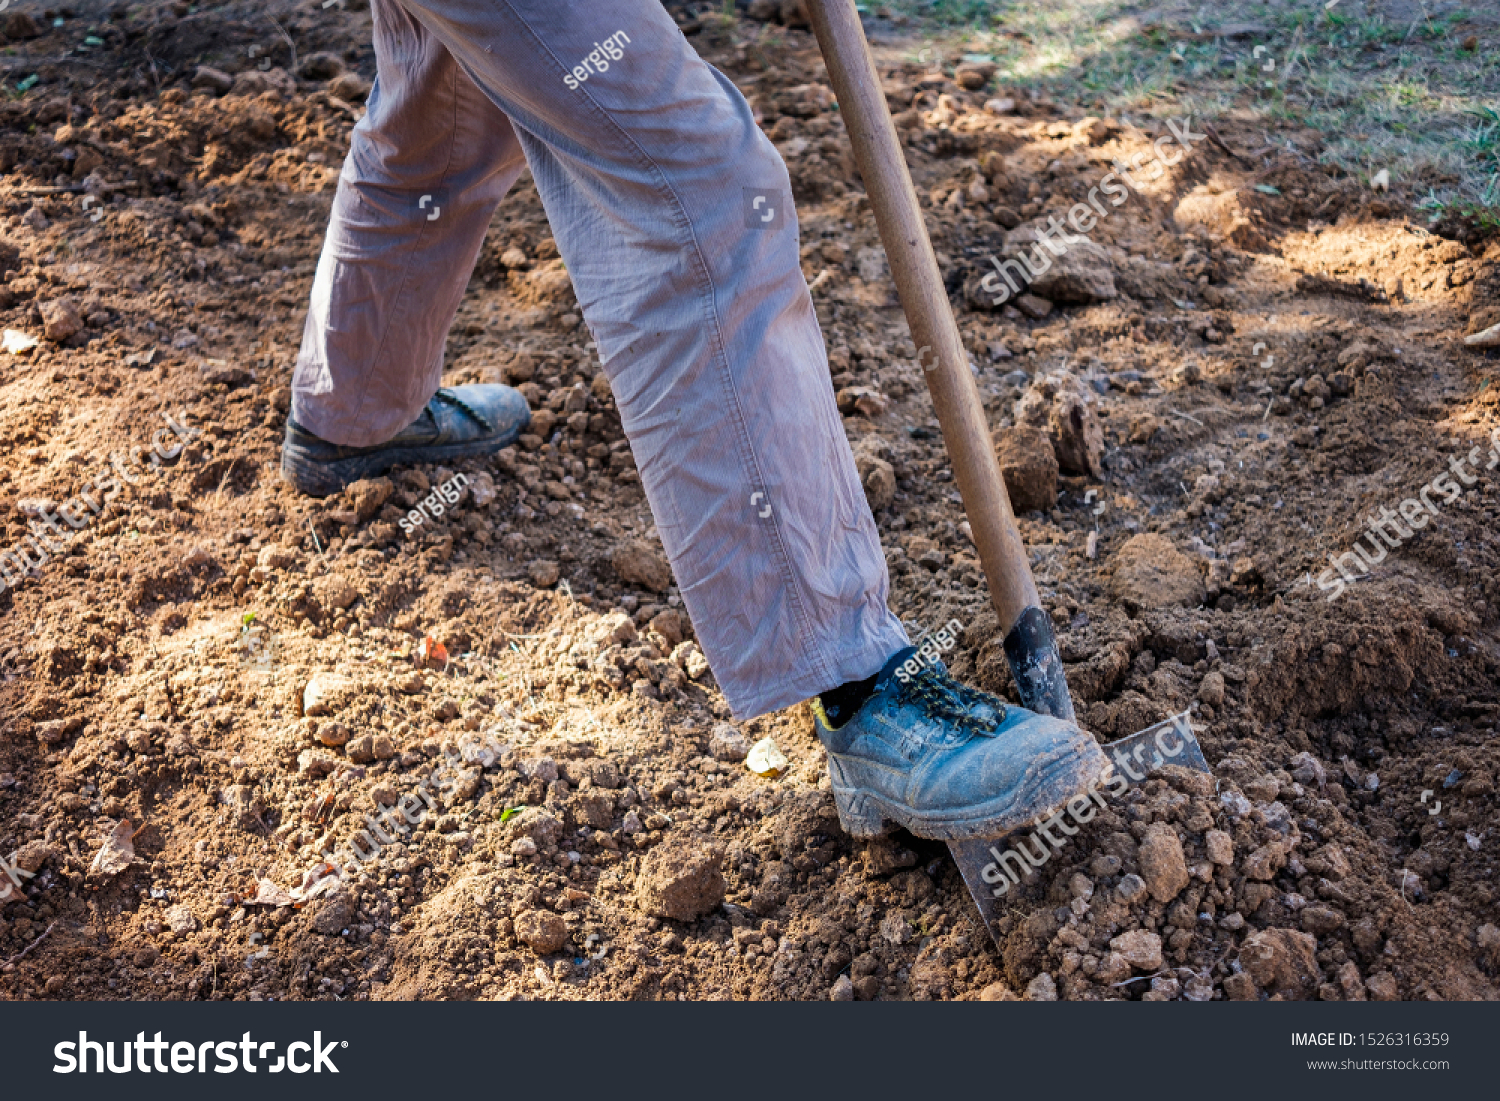 Man digging over earth with a spade in a low angle view of his legs in a gardening and horticulture concept #1526316359